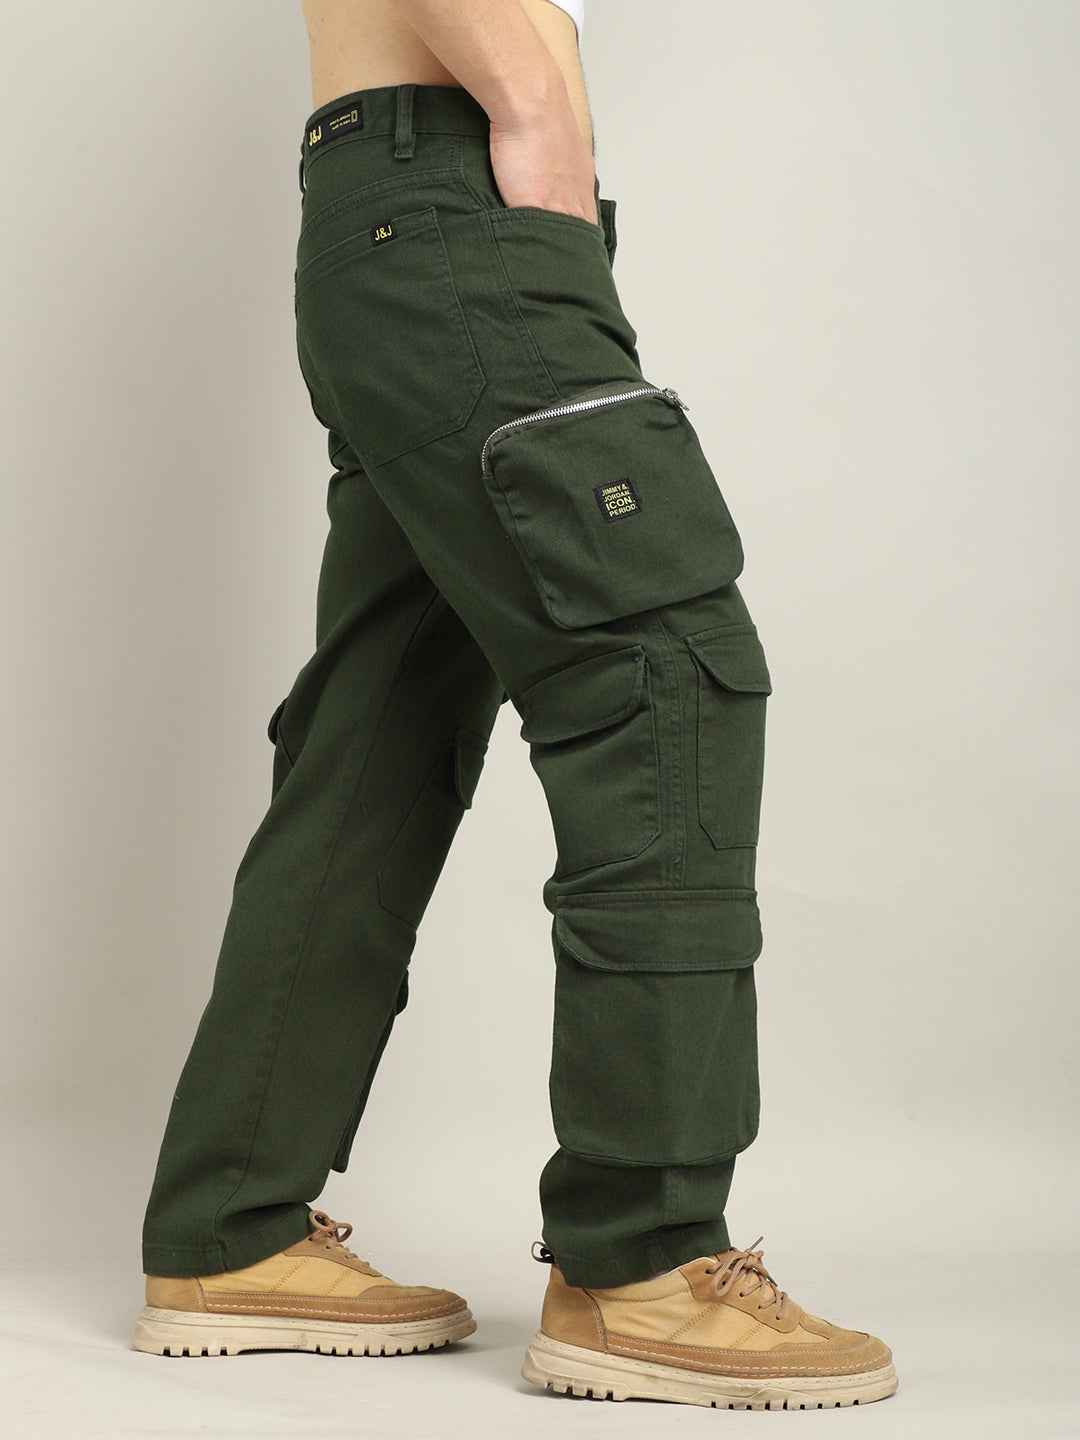 Lucas Multipocket Olive Cotton Drill Cargo